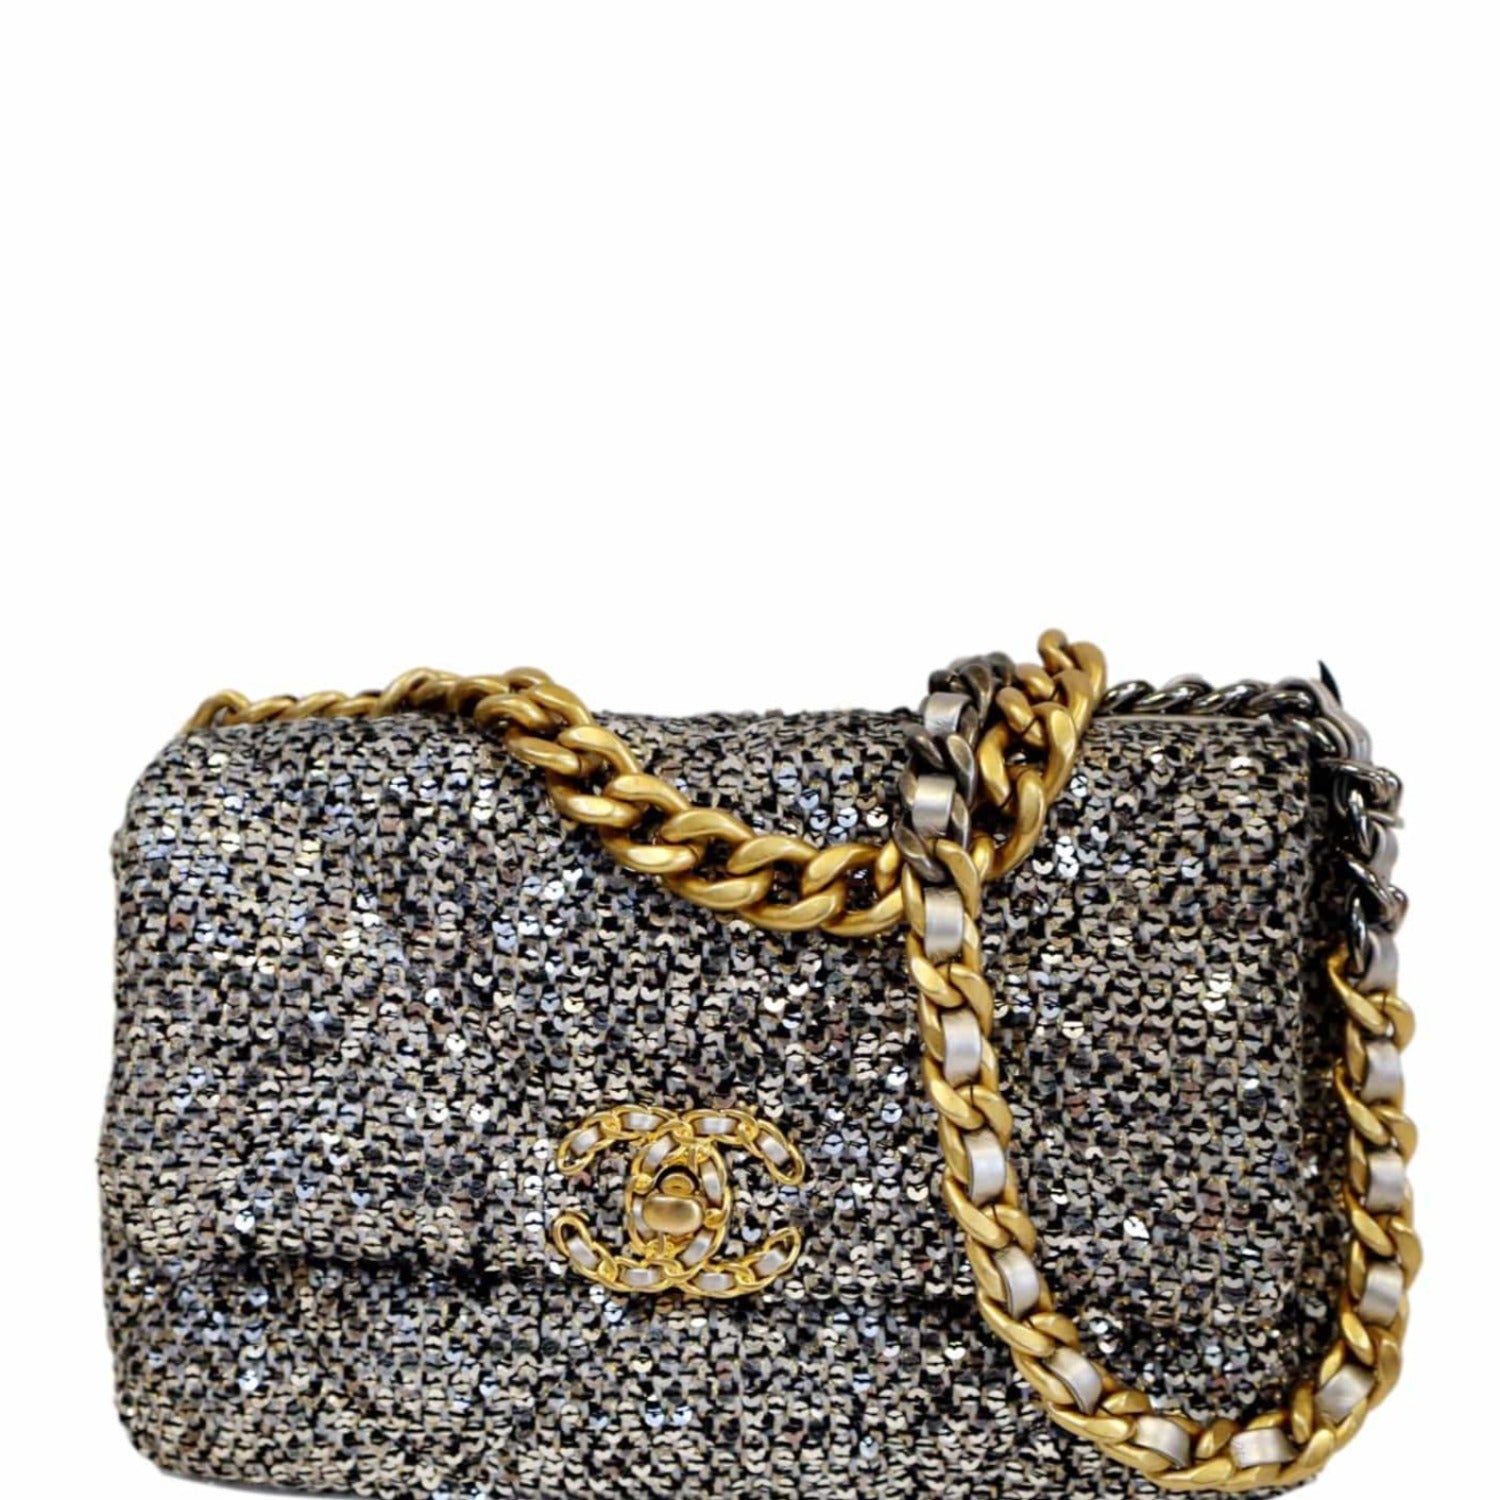 The Chanel 19: The Newest Must Have Chanel Bag